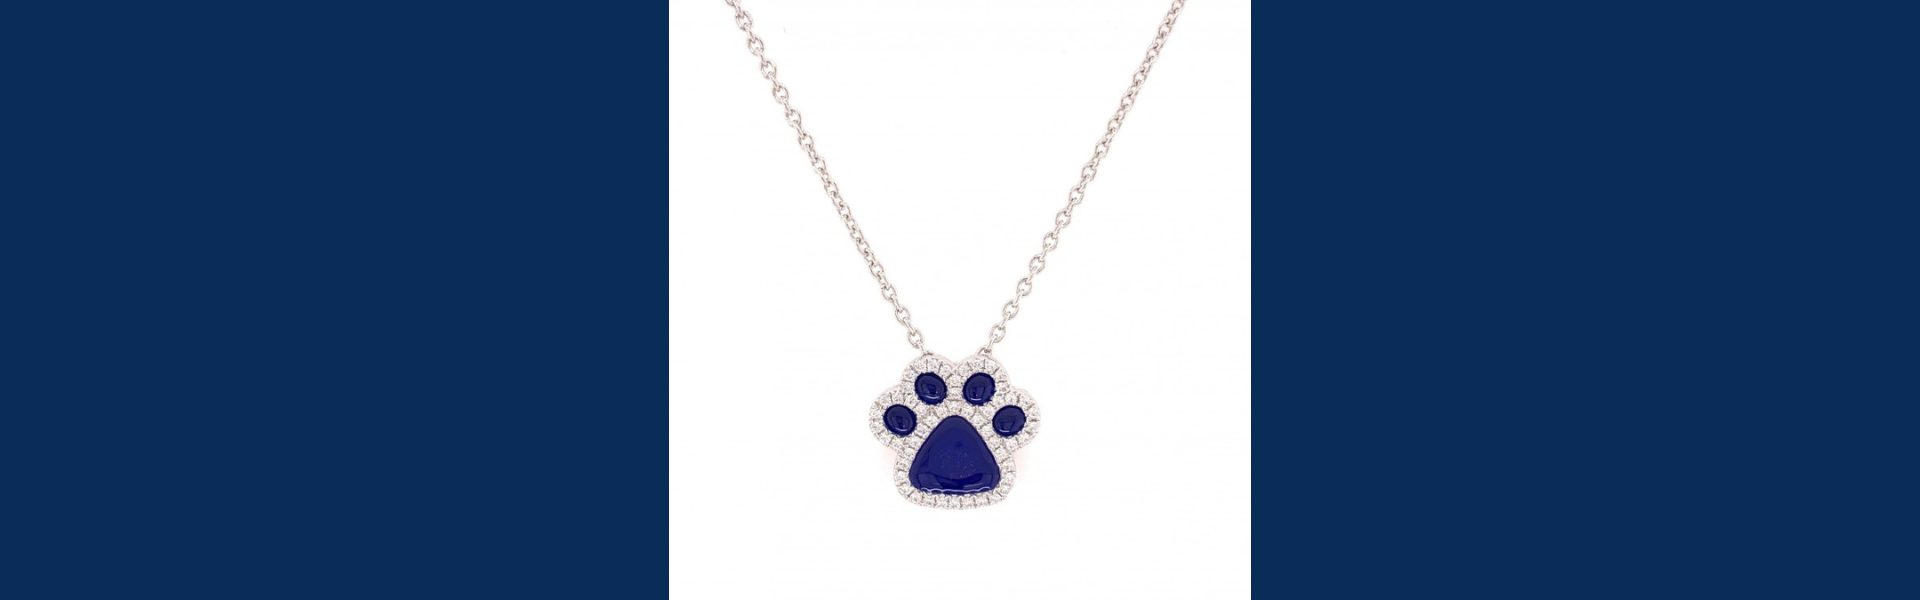 Penn State, Lion, and Paw Jewelry